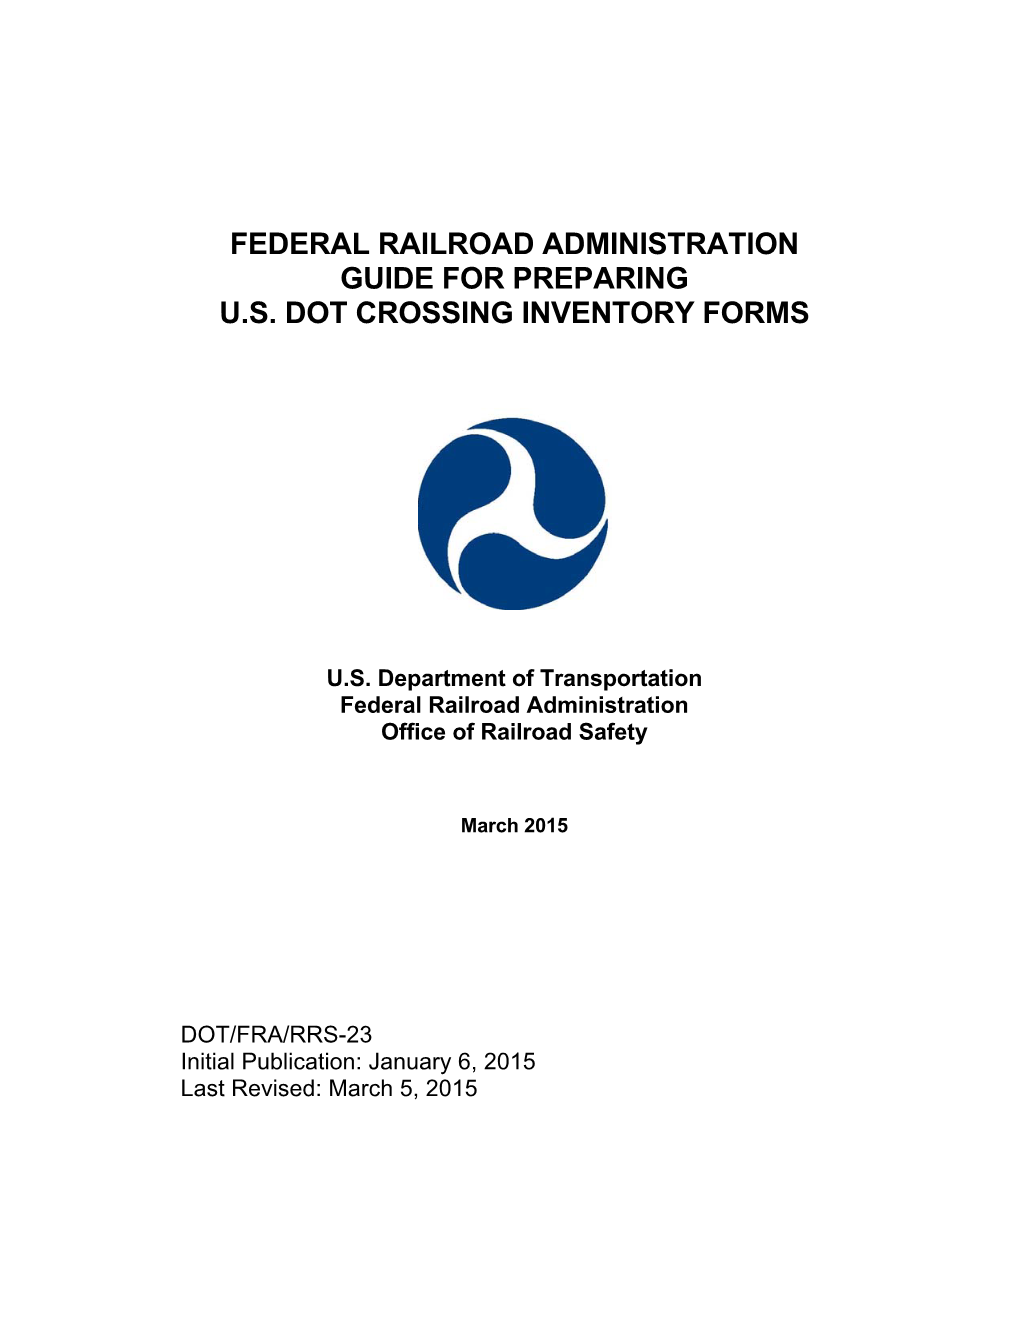 FRA Guide for Preparing U.S. DOT Crossing Inventory Forms